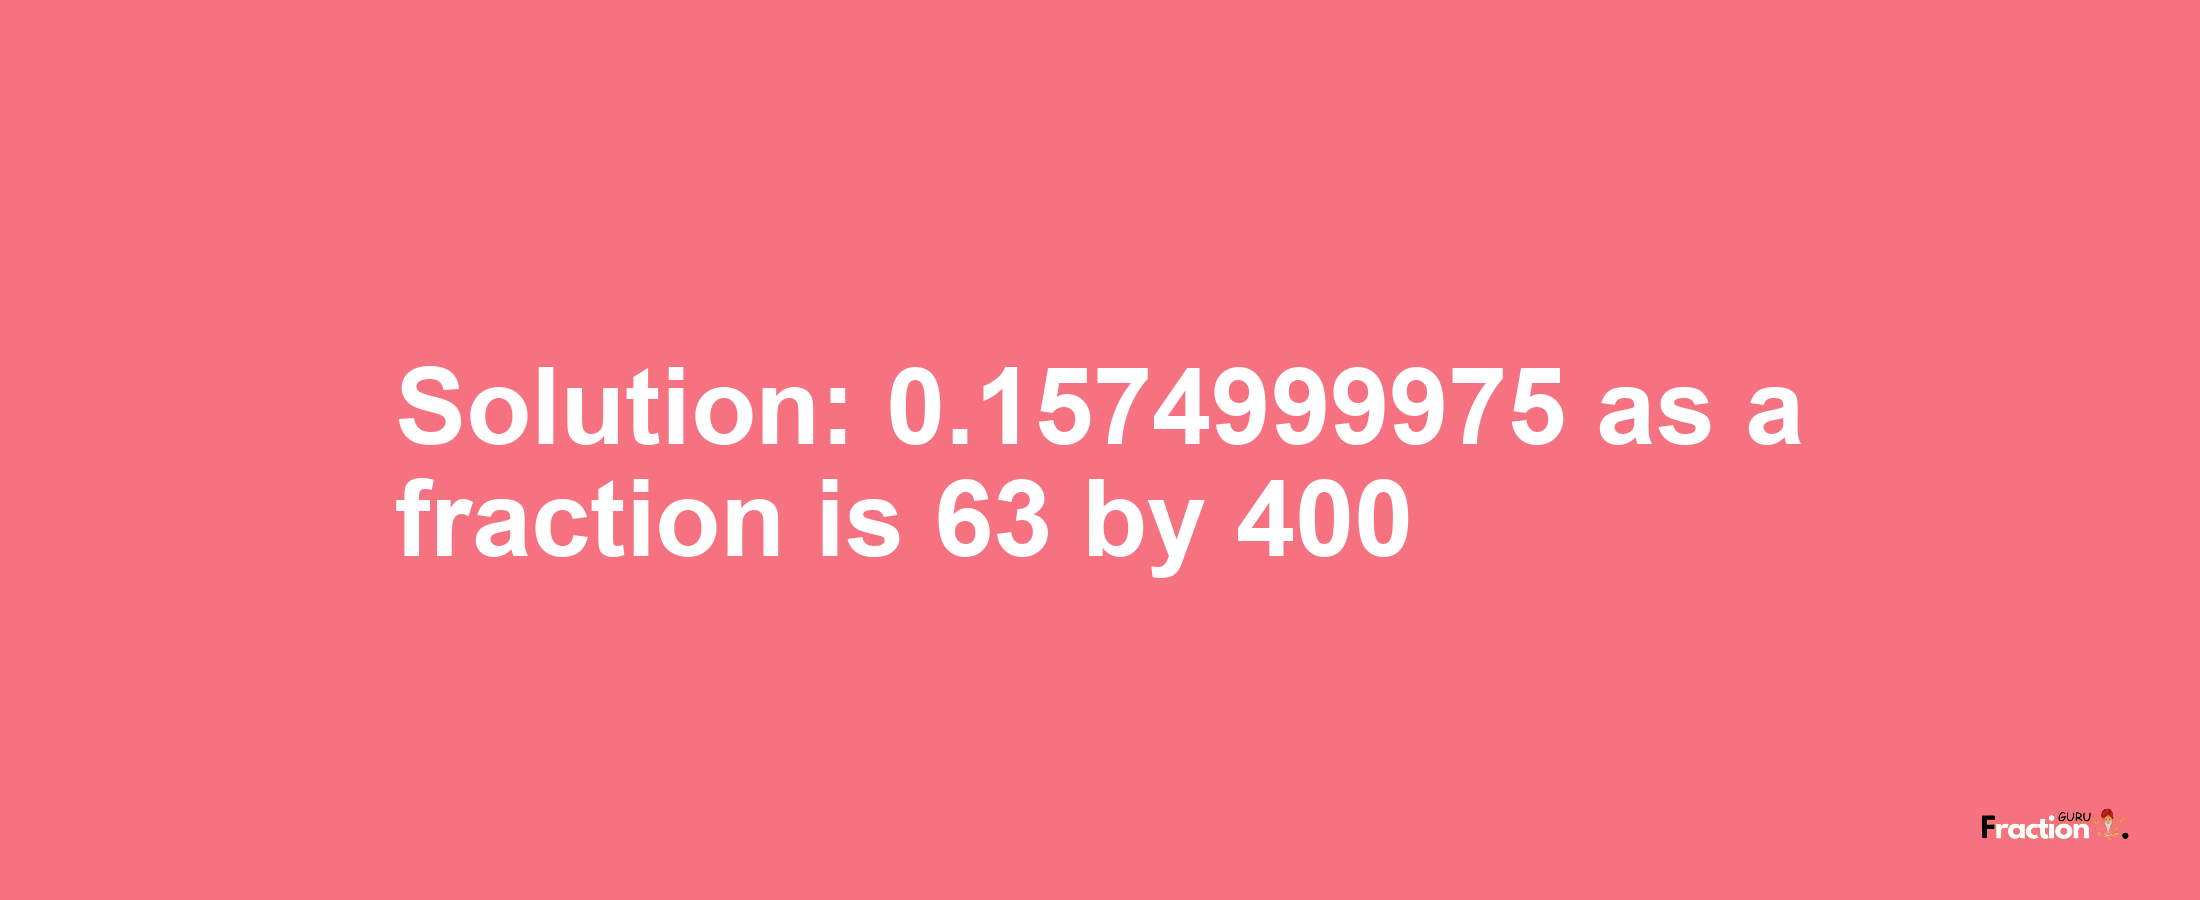 Solution:0.1574999975 as a fraction is 63/400